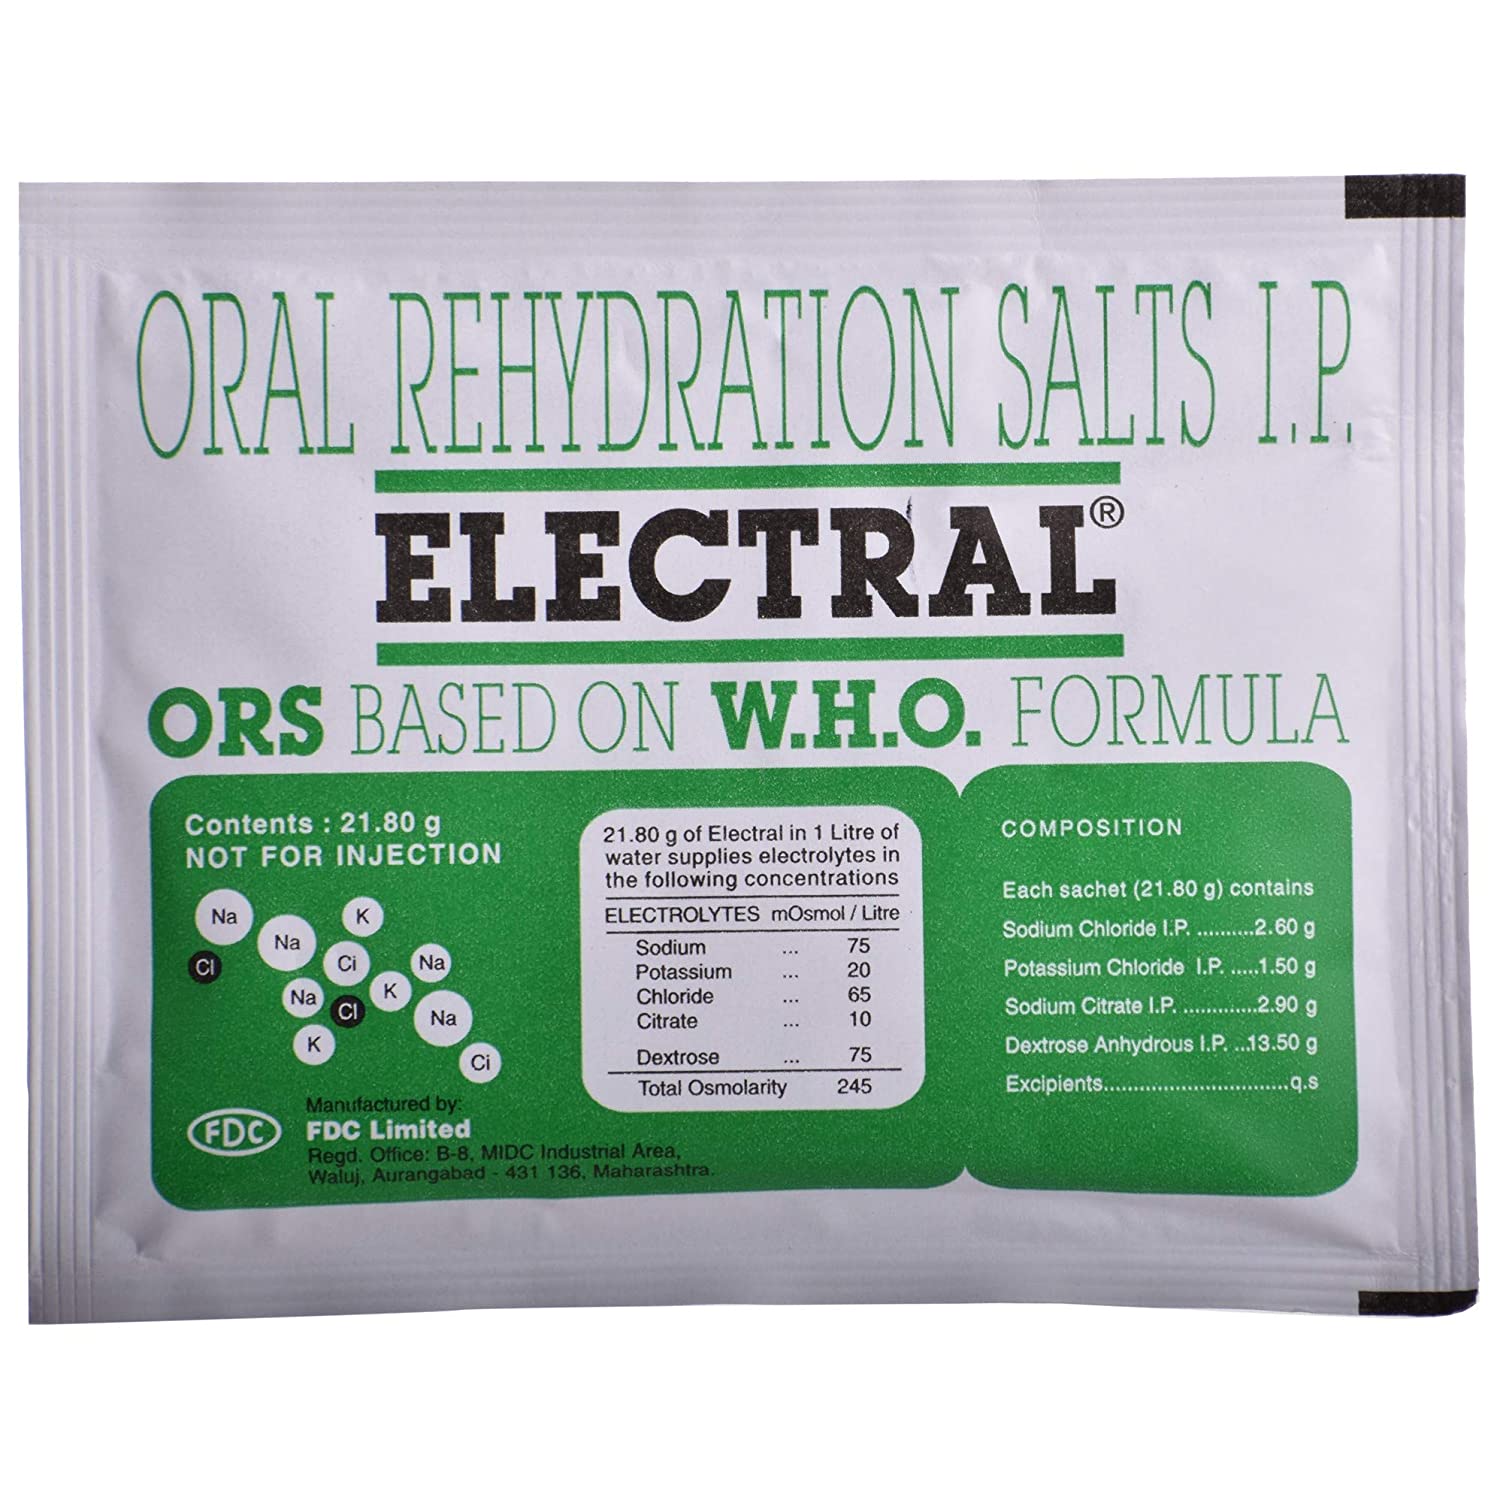 Shop Electral - Oral Rehydration Salts Powder 21.80gm at price 19.84 from FDC Limited Online - Ayush Care